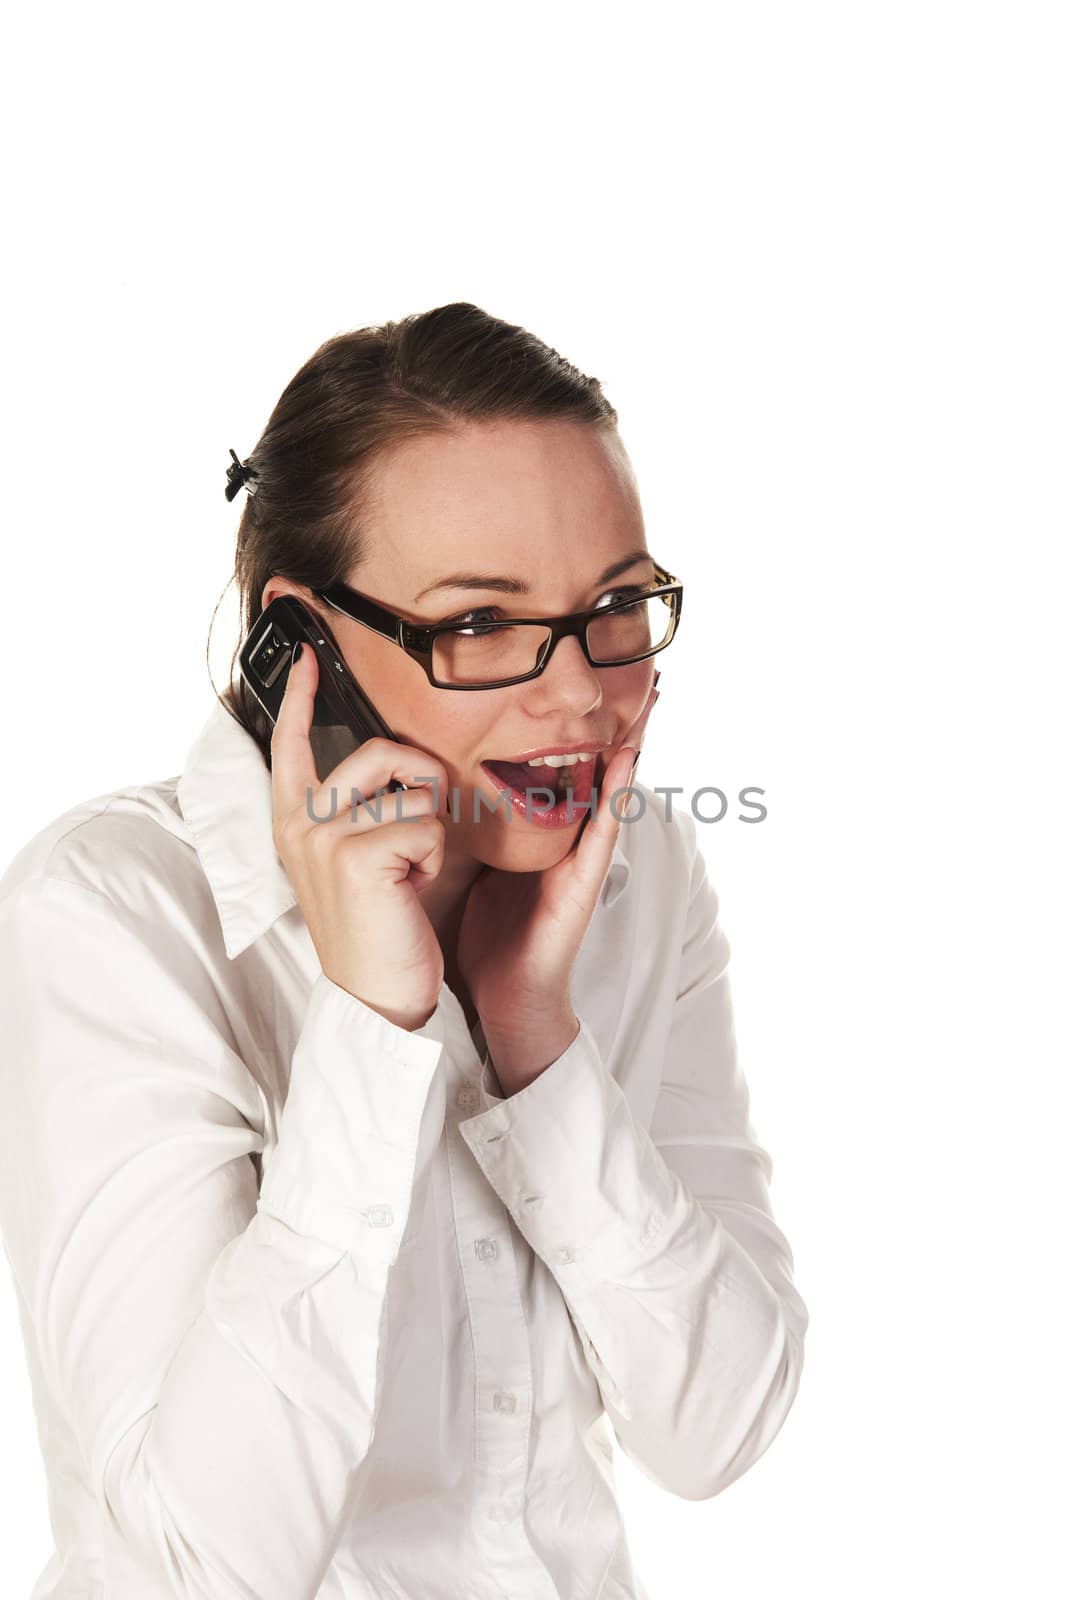 Beautiful girl getting good news on the phone, seen against white background